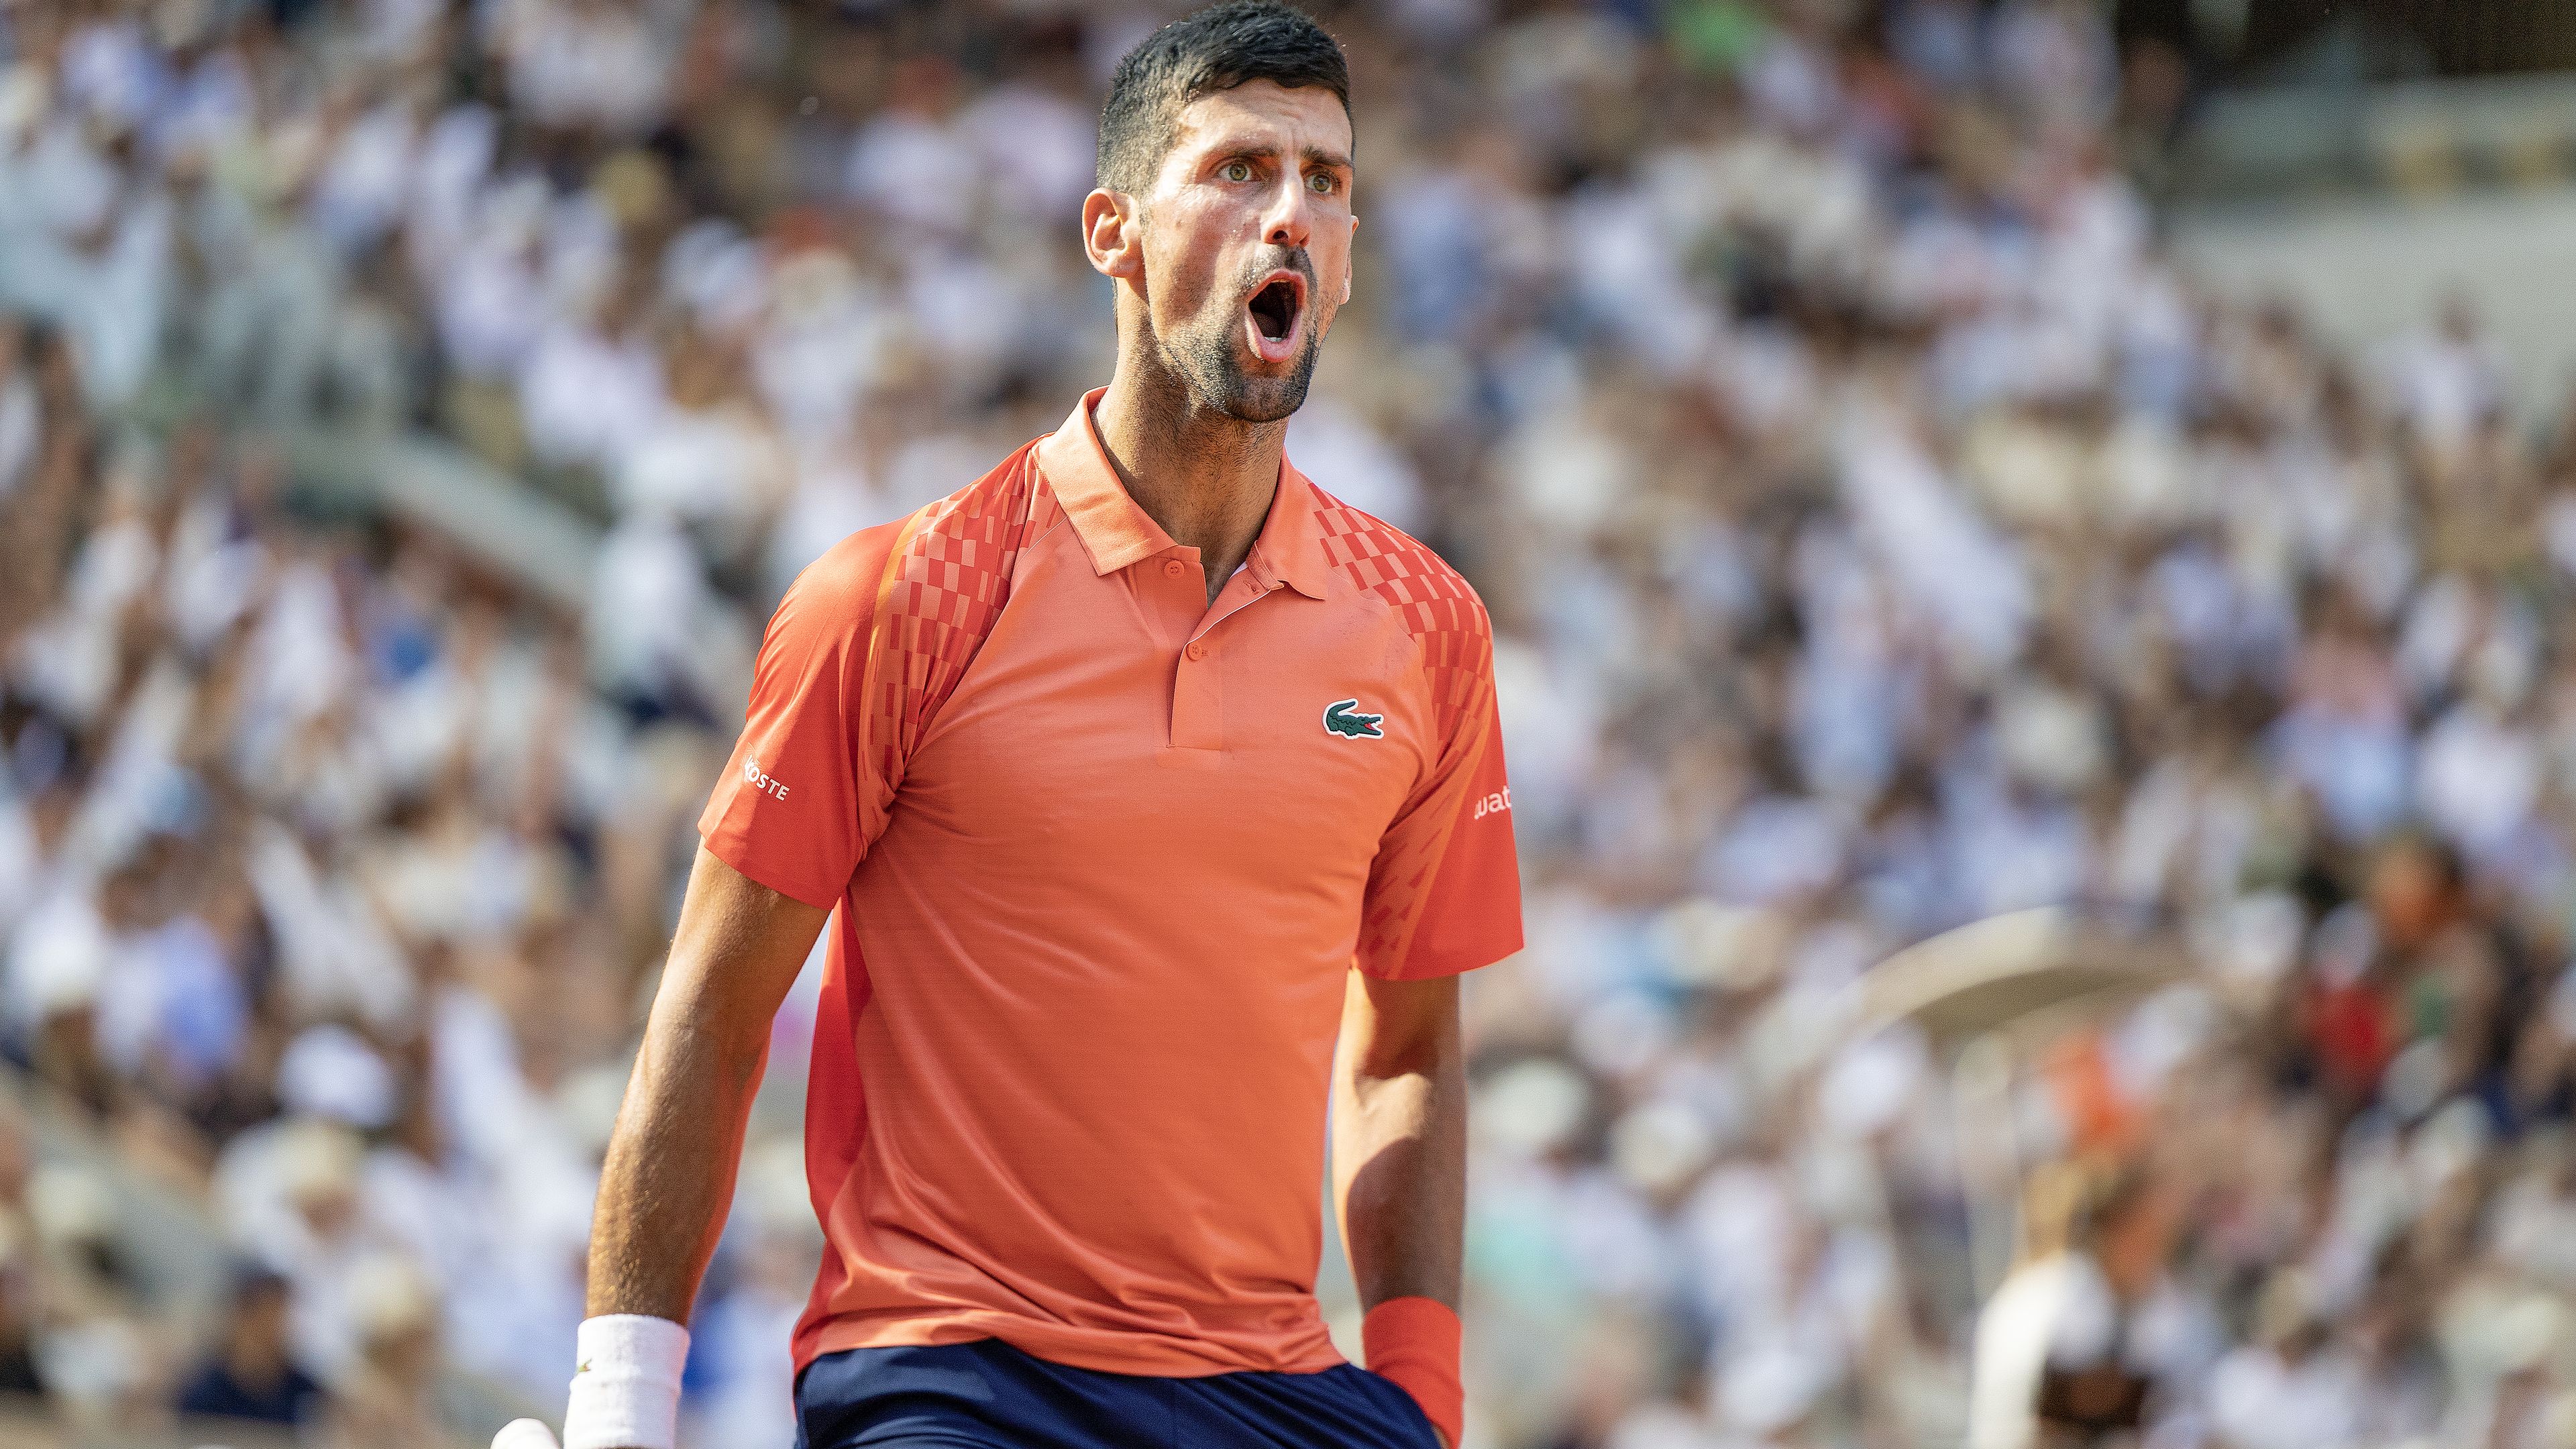 Novak Djokovic of Serbia reacts during his match against Carlos Alcaraz of Spain.